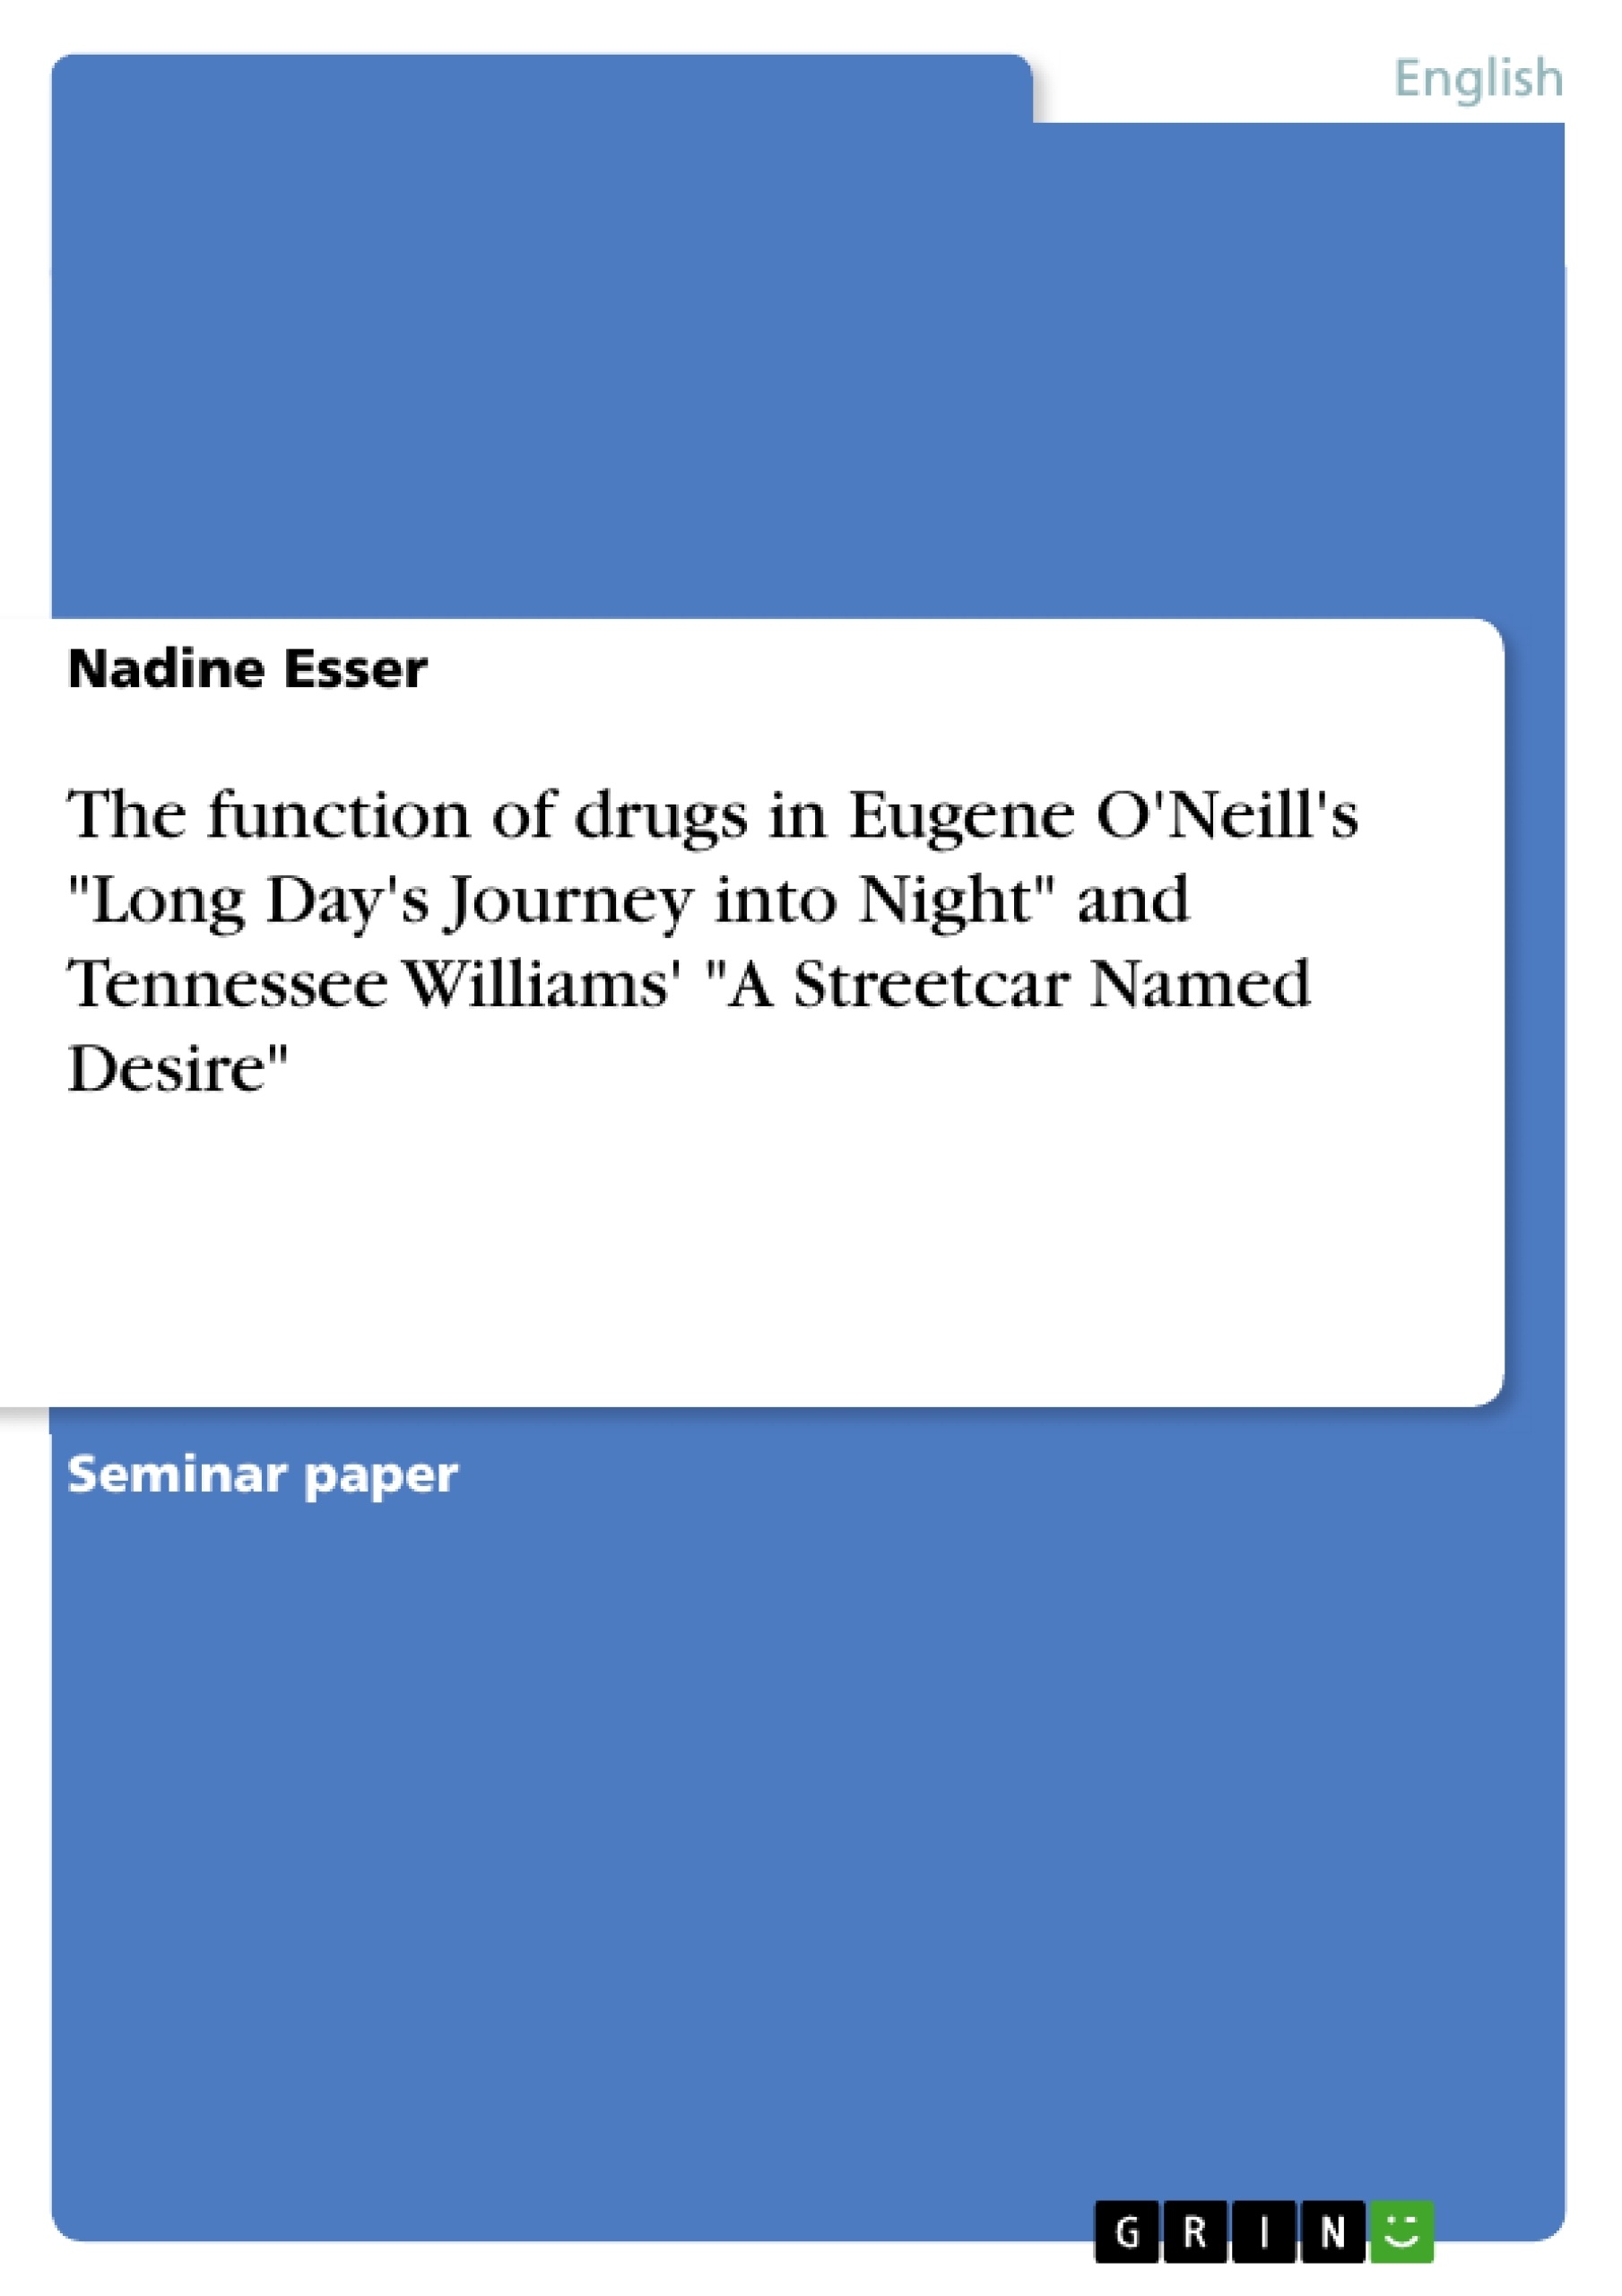 Título: The function of drugs in Eugene O'Neill's "Long Day's Journey into Night" and Tennessee Williams' "A Streetcar Named Desire"